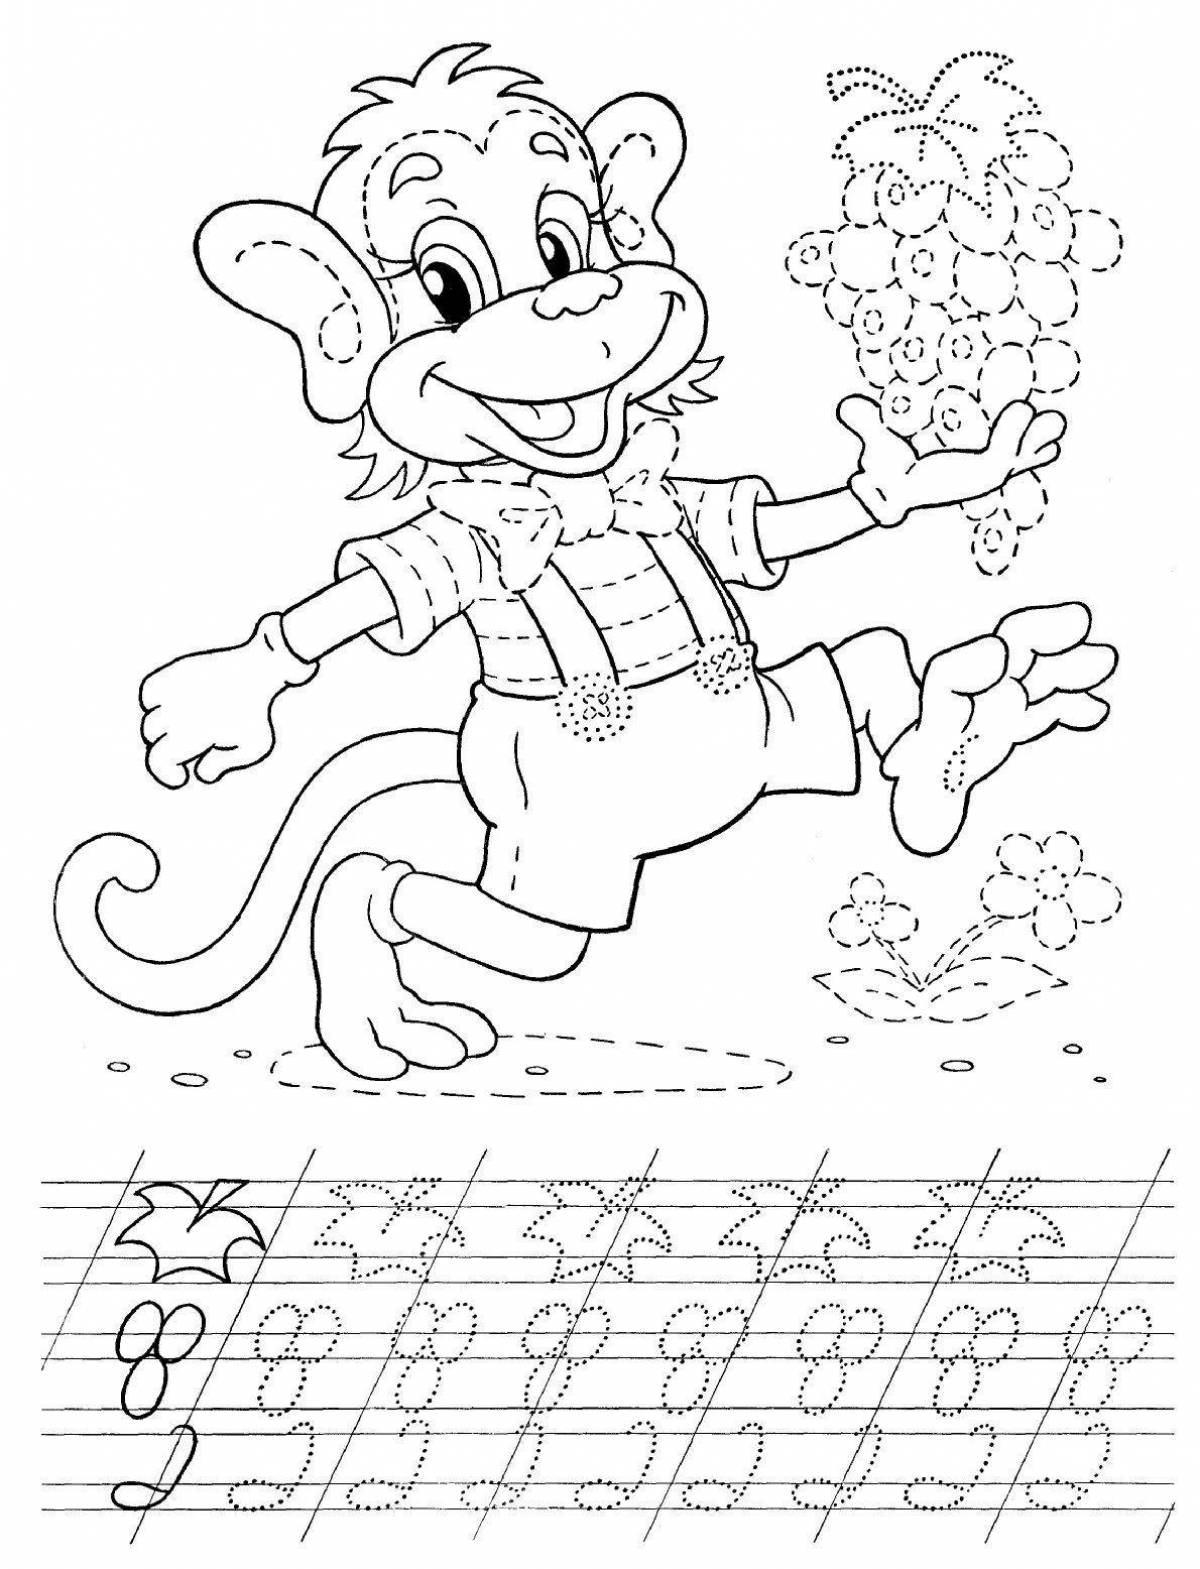 Fun recipe coloring book for 5 year olds